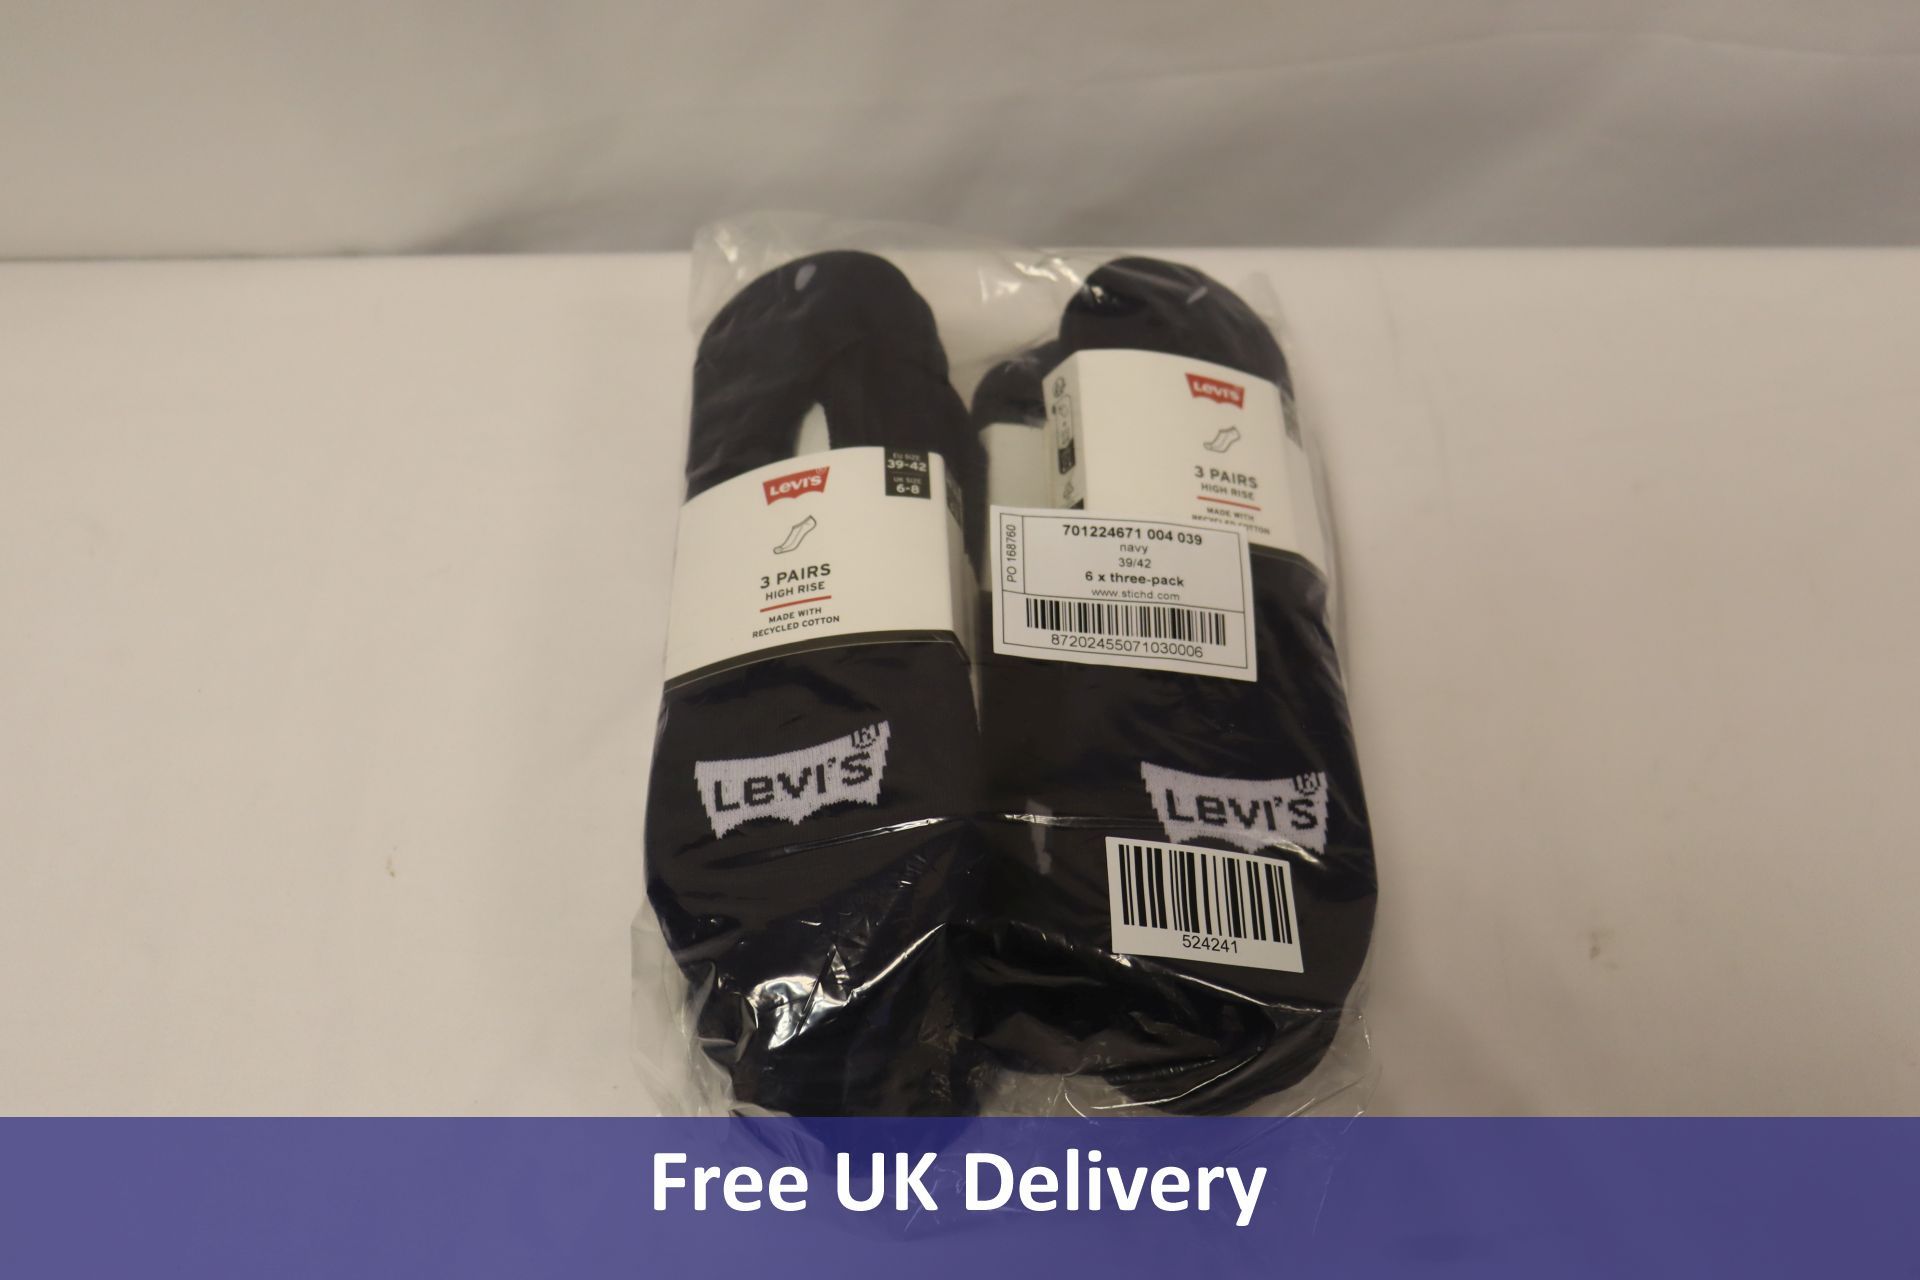 Six Levi's High Rise Batwing Logo Recyled Cotton Trainer Socks, 3 Pack, Navy, Size 6-8